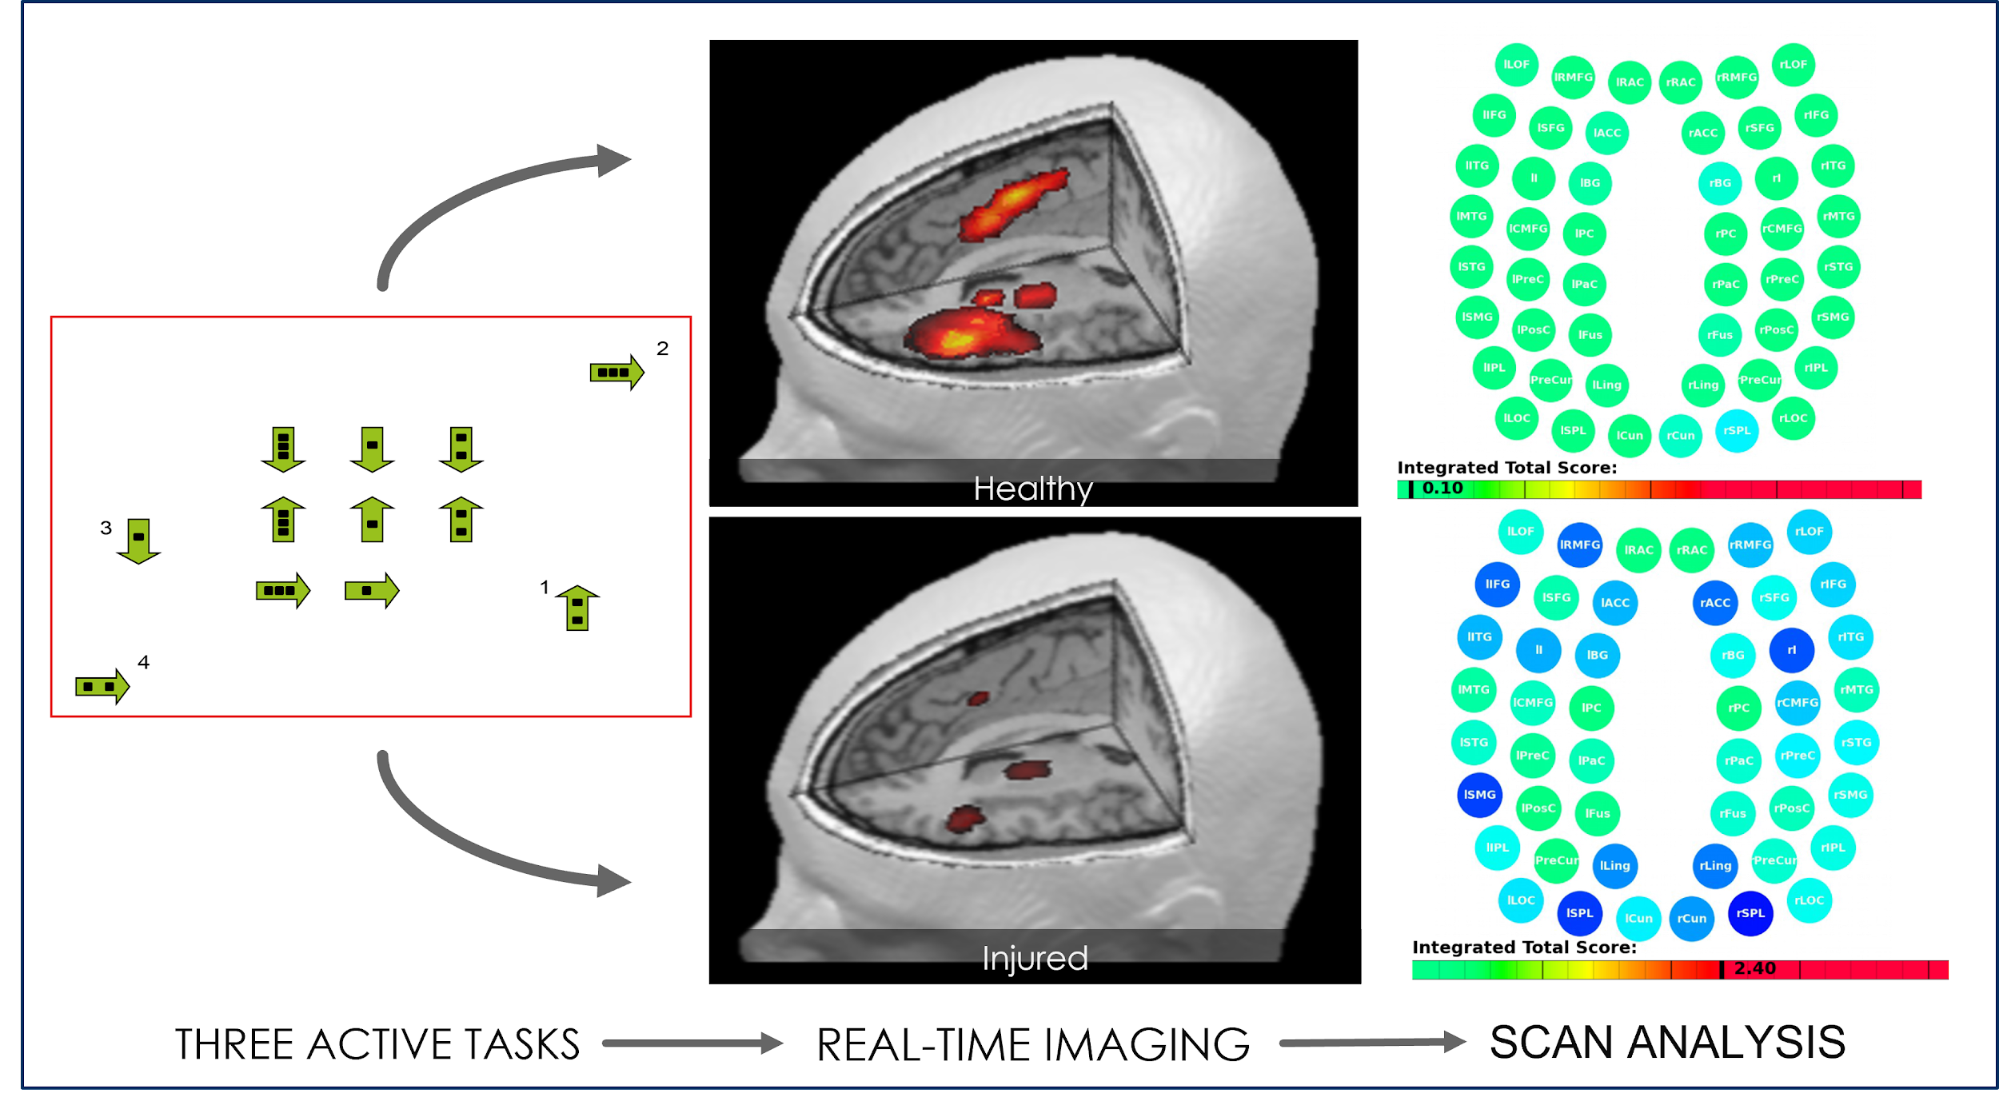 Real-Time Imaging and Scan Analysis